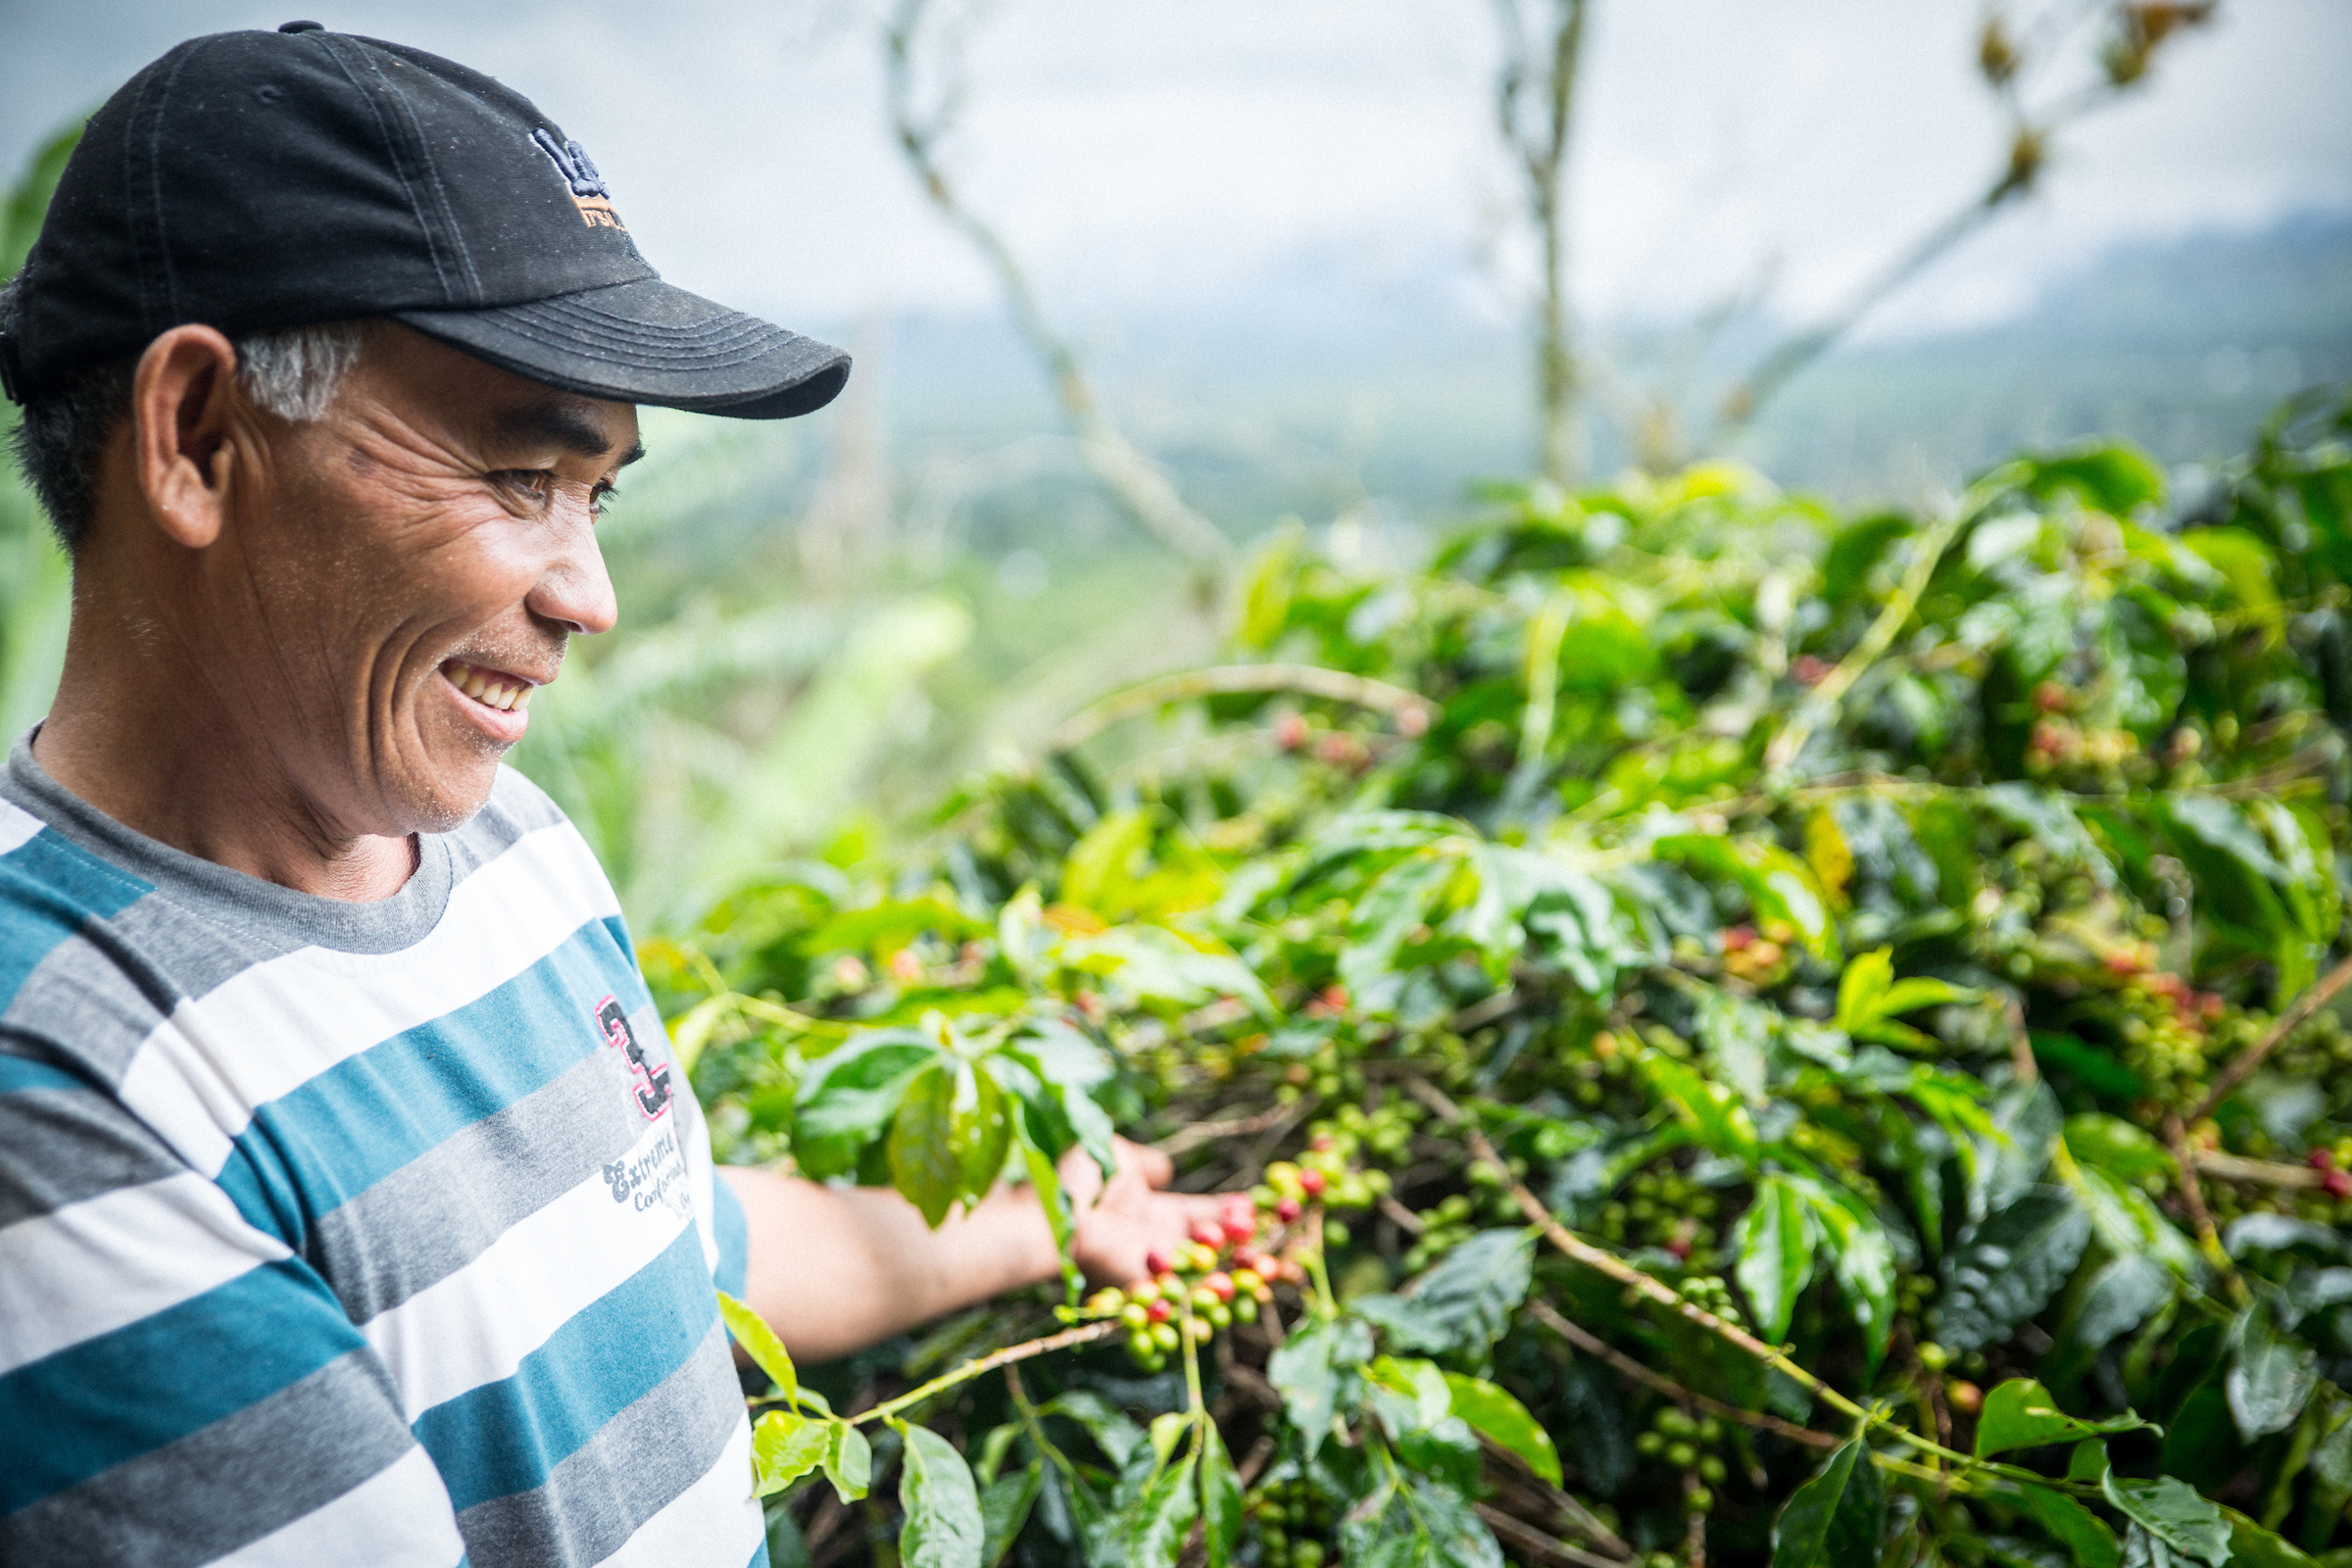 These photos were taken by Blake Dunlop in a 2015 trip to the Takengon region of Sumatra, Indonesia. These photos feature four of the five coffee cooperatives with whom we work in Indonesia.